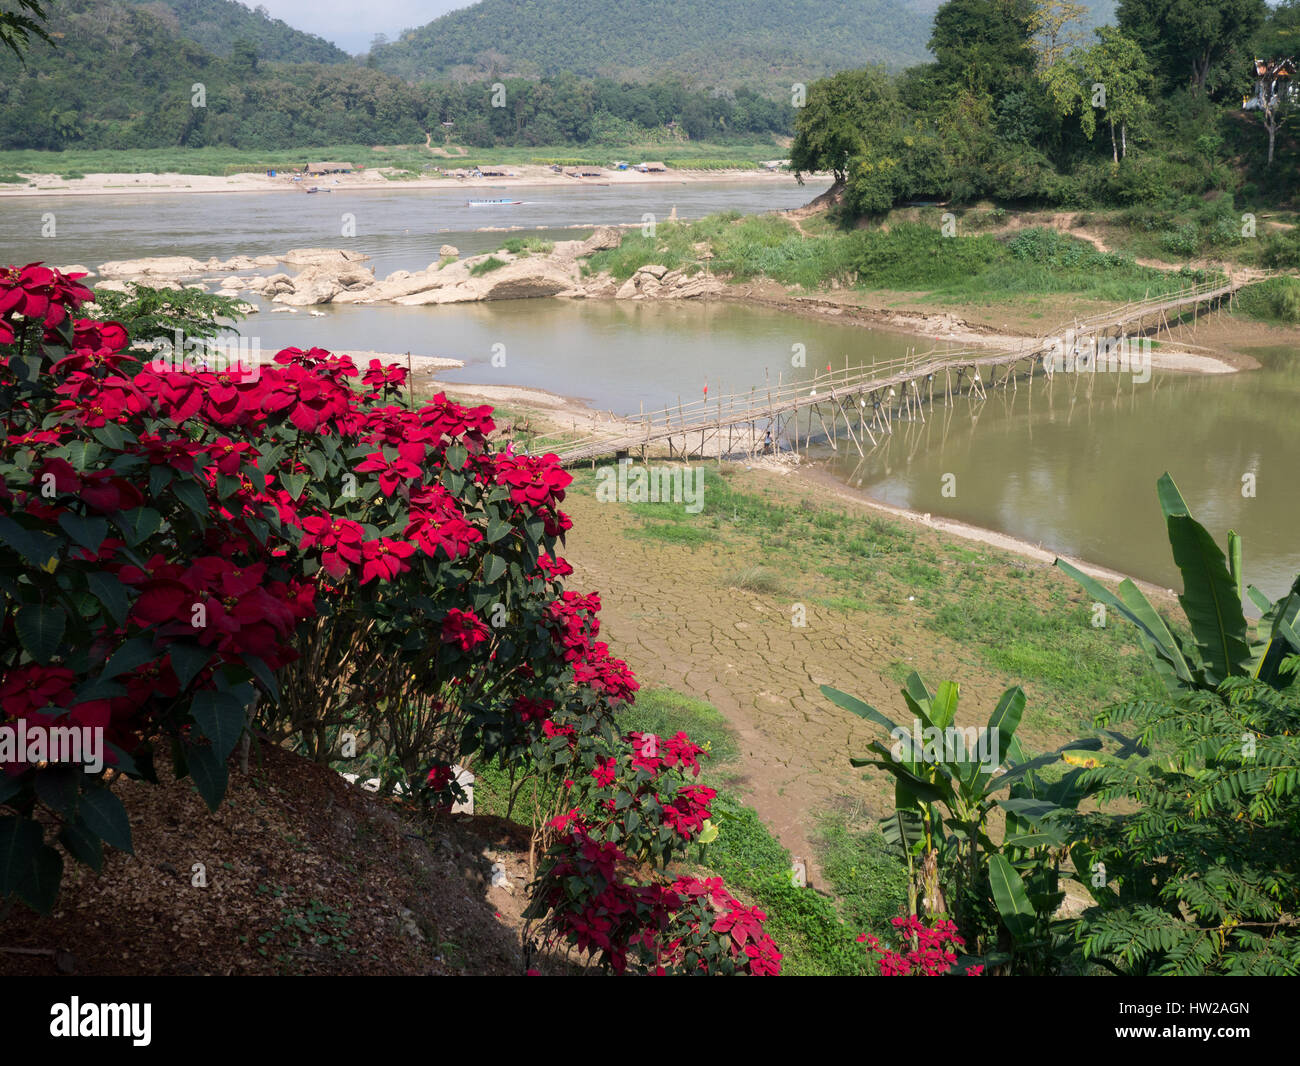 A flimsy looking footbridge over a tributary of the Mekong River. Stock Photo